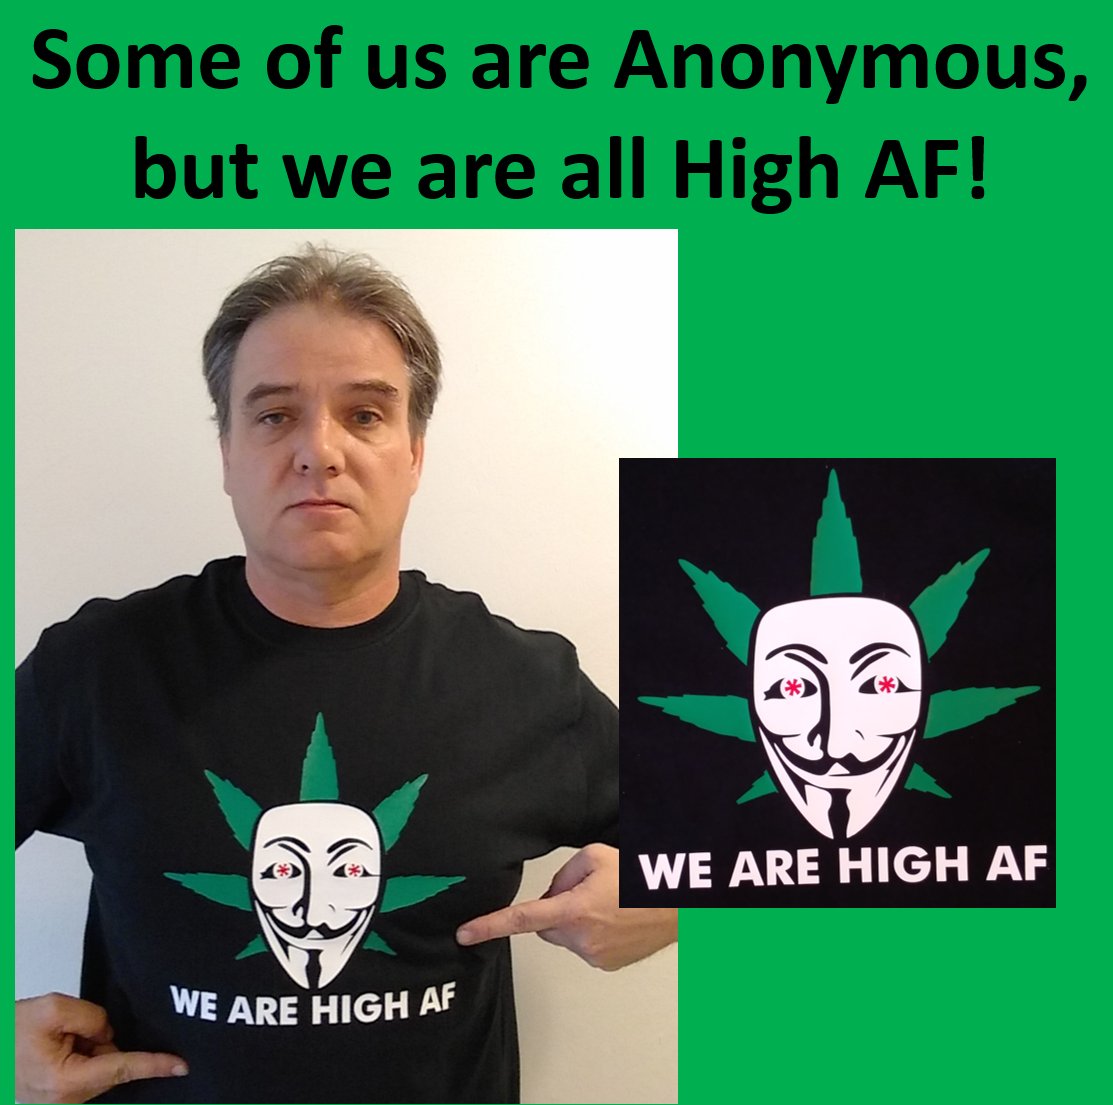 @AnneCla57358988 @ArmyOfPotheads @Cogitatorium @Rocky4President @cannabisNYC @_jena4n @Hippie_of_Love @hippieluvbud62 @TheLoudBank @Norstackk @HighImHarvey @EmeraldZoo @CANNiLIVE @cannaworldsite i agree, if it is was up to jeff sessions, he would throw us all in jail and toss the key